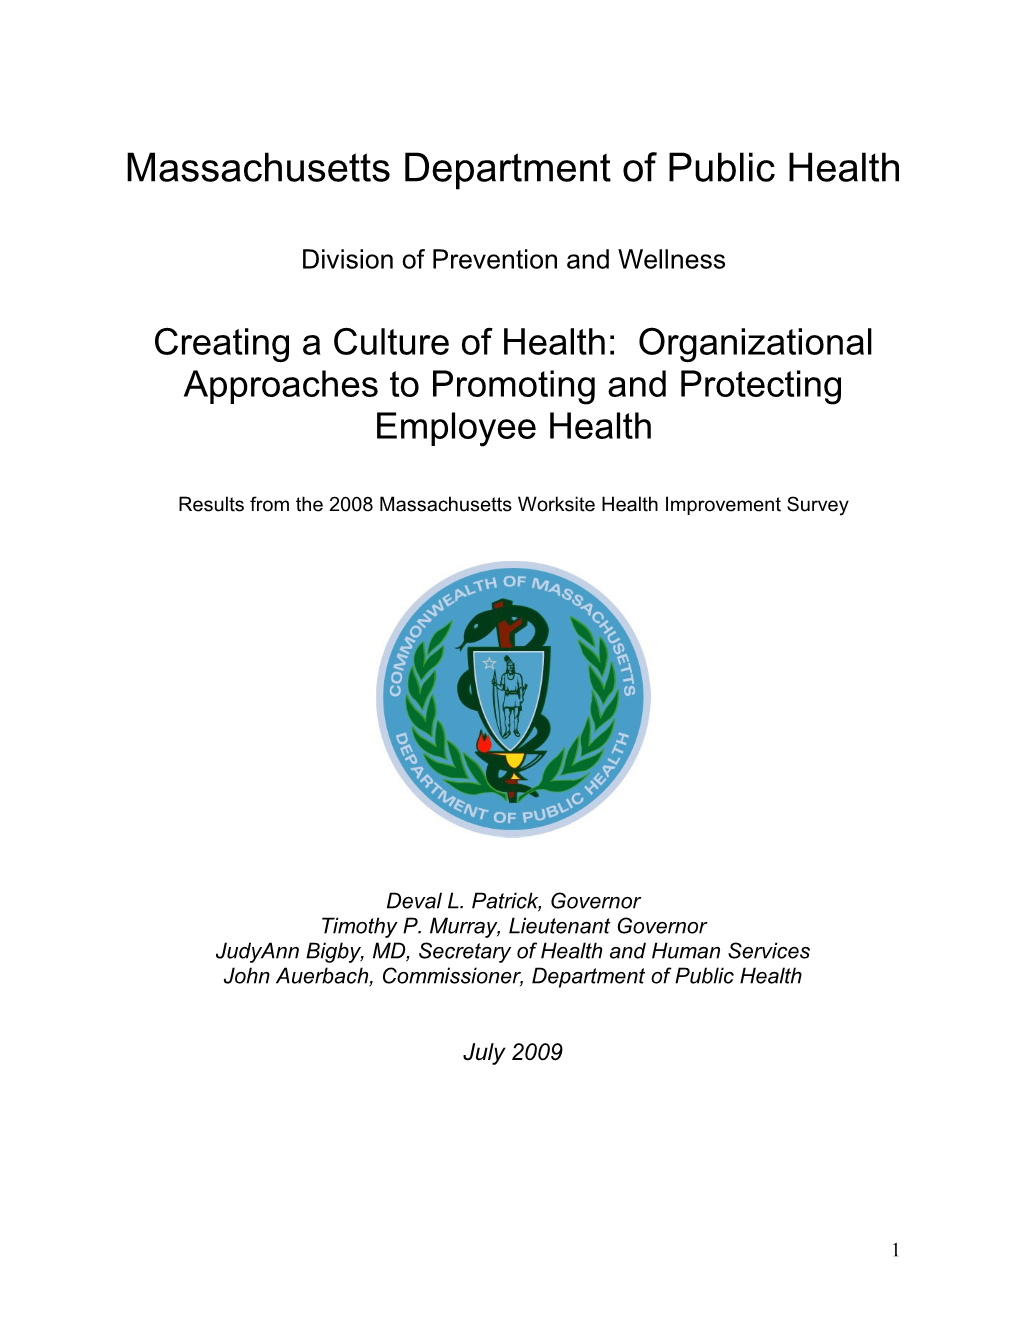 “Impacting Worksite Health Improvement By Creating A Culture Of Health”